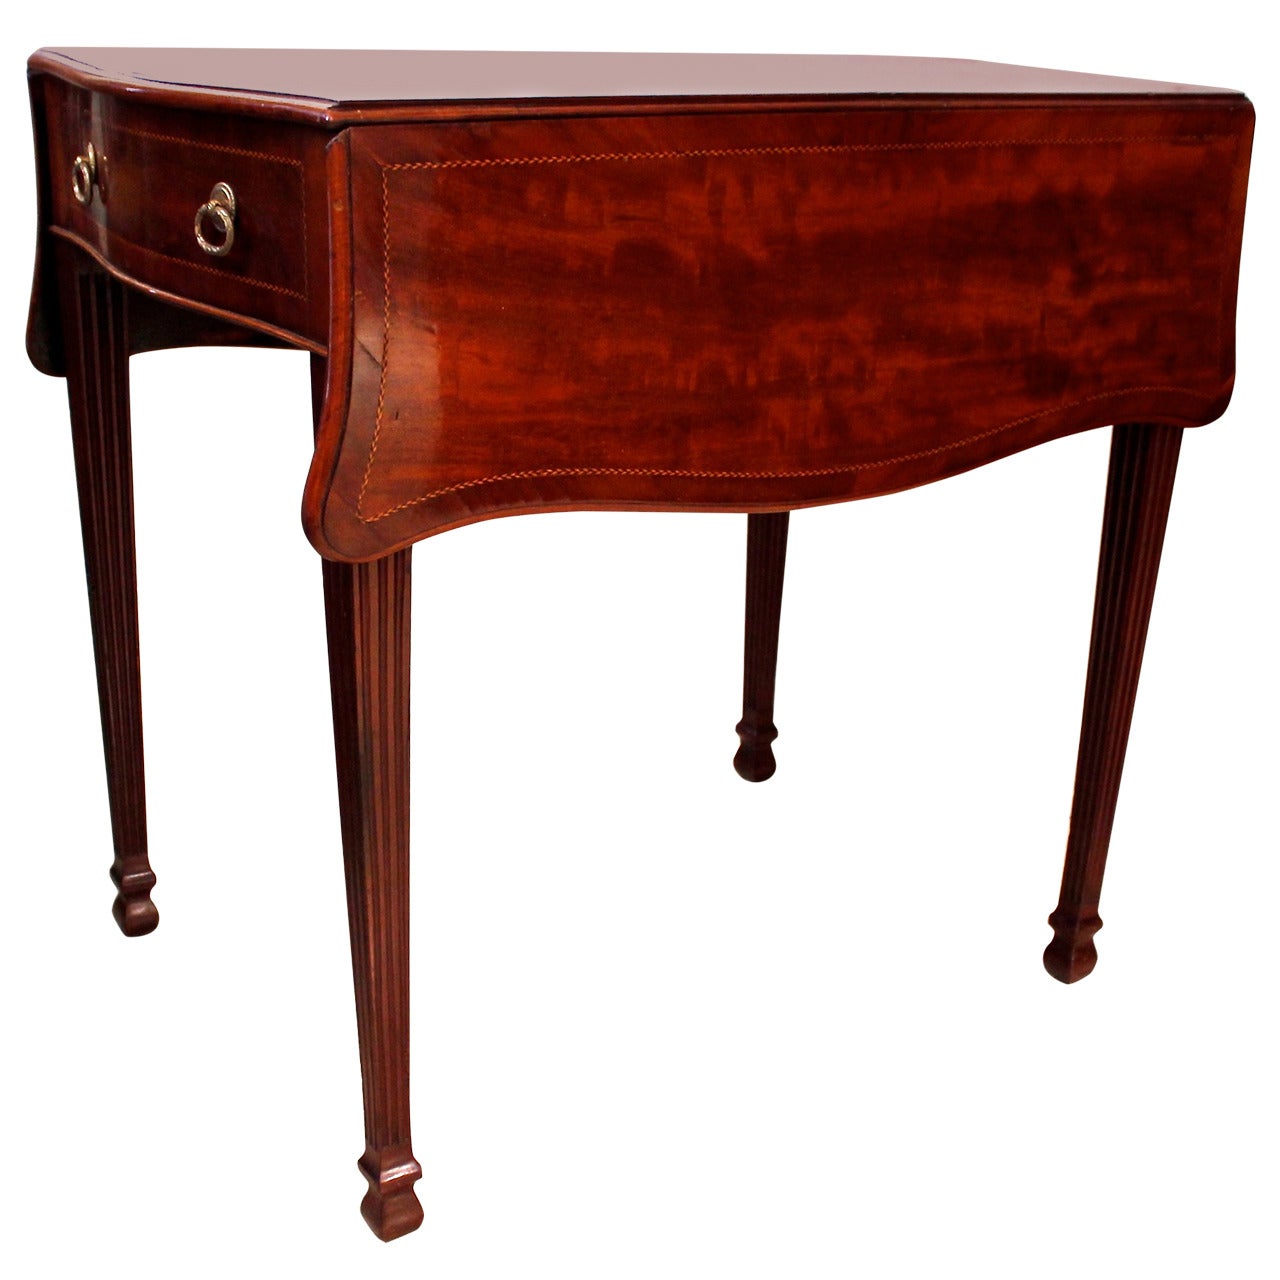 George III Serpentine Inlaid Mahogany Pembroke Table, 18th Century For Sale